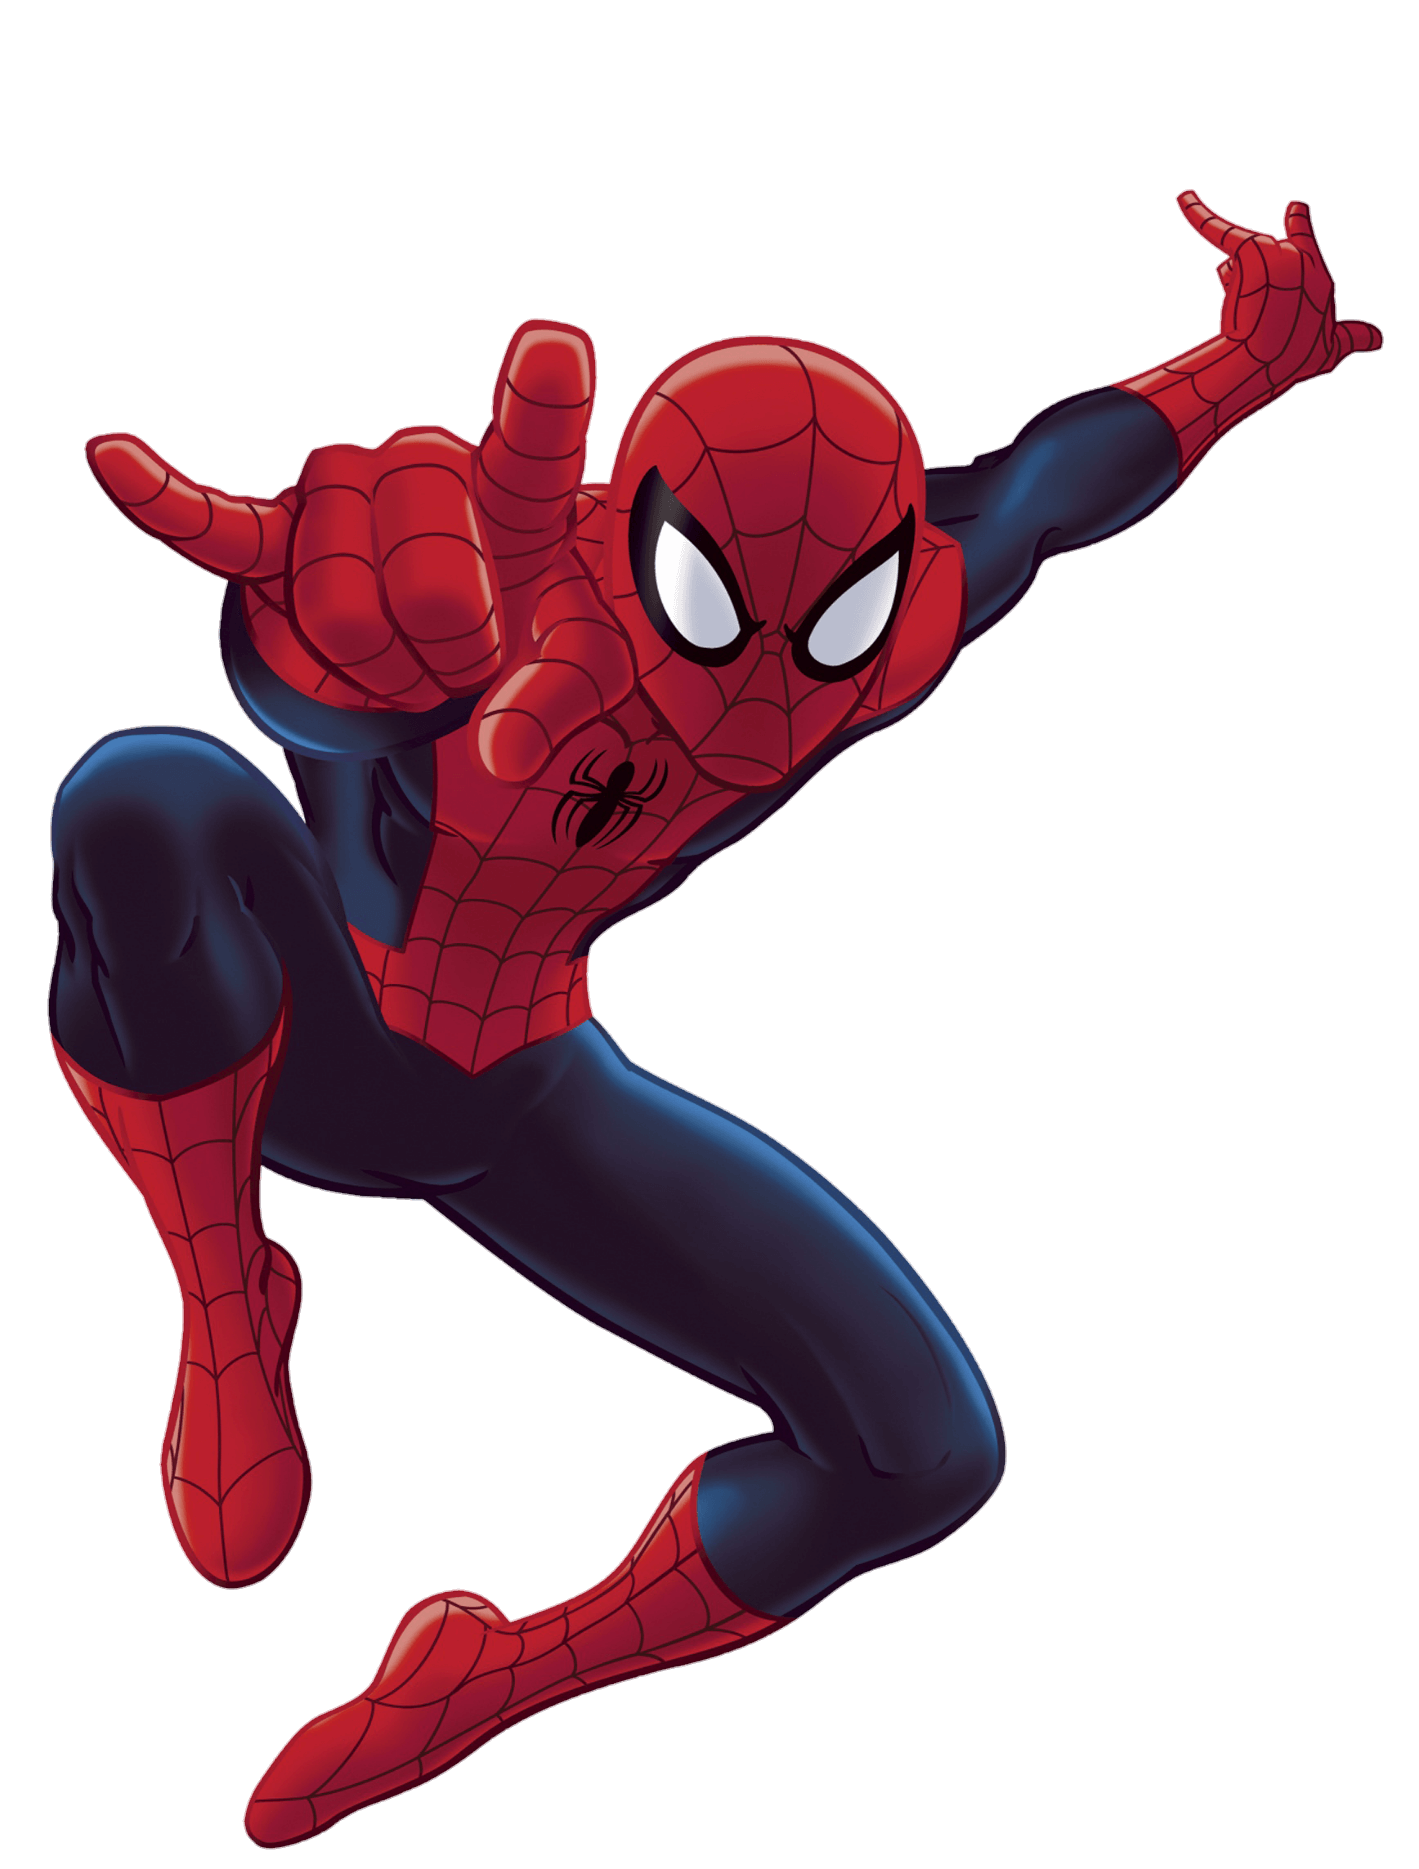 spider-man-png-from-pngfre-46-1